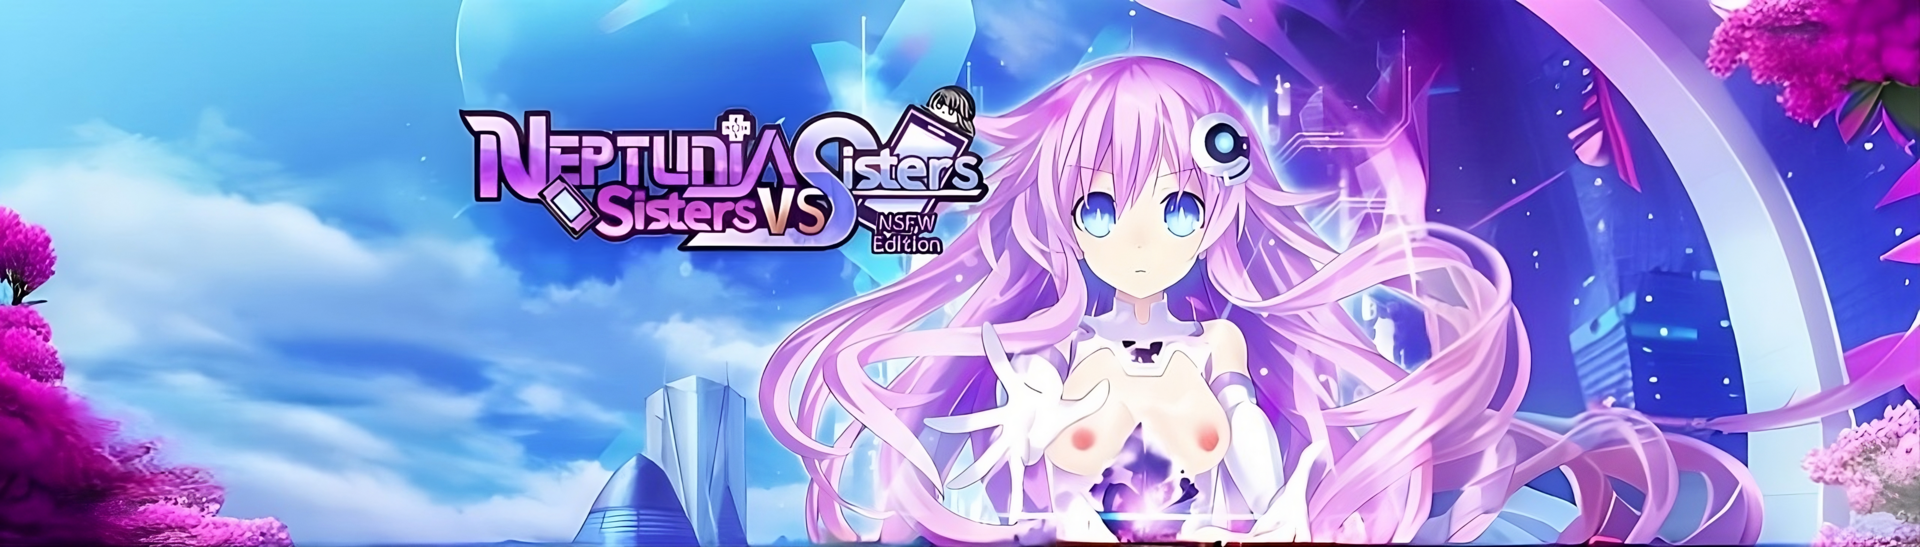 https://www.loverslab.com/topic/218809-neptunia-sisters-vs-sisters-complete-nsfw-modpack-uncensor-patch-%E2%86%90-download-available-new-variants-models-textures-and-physics/